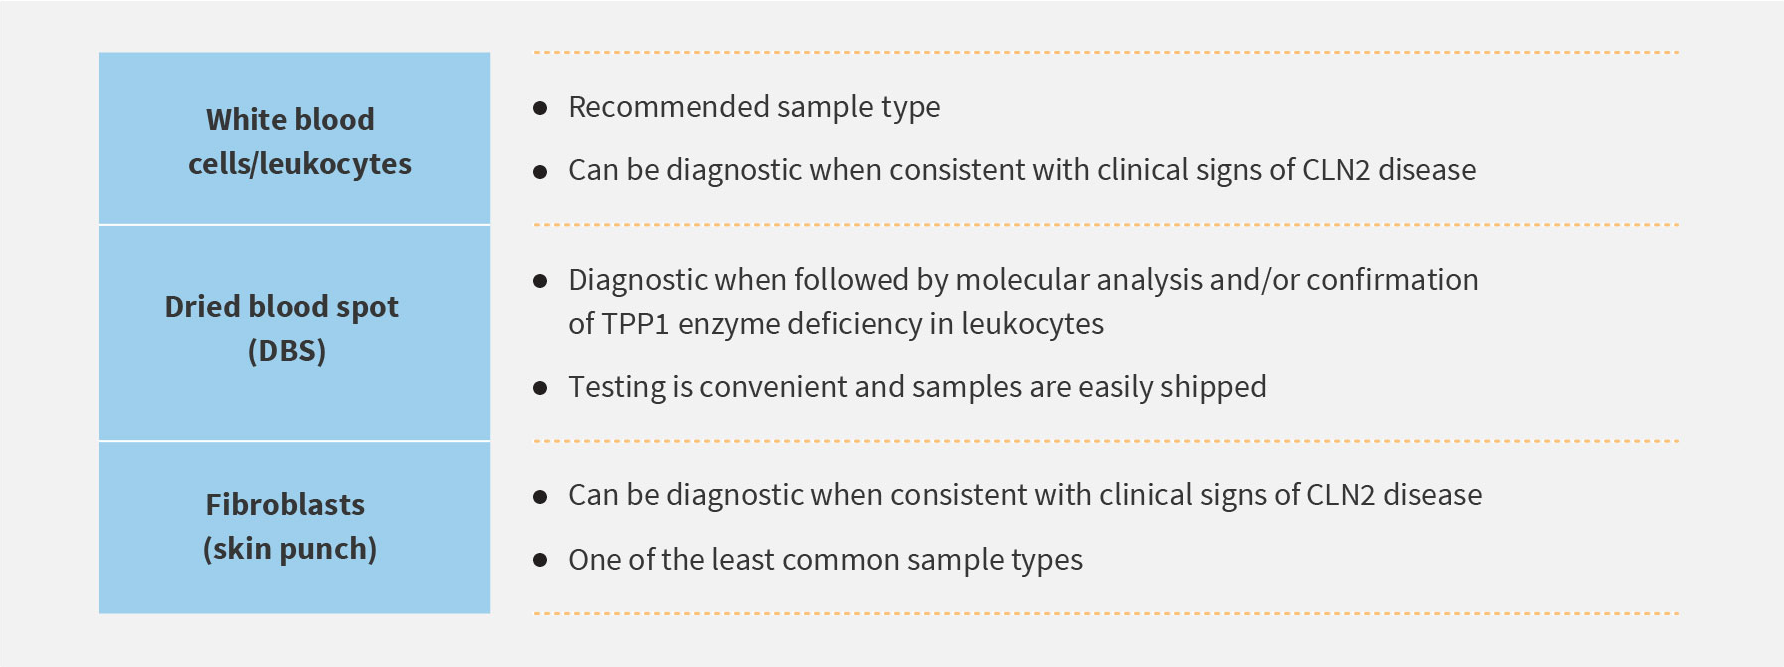 Enzymatic testing to assess TPP1 activity